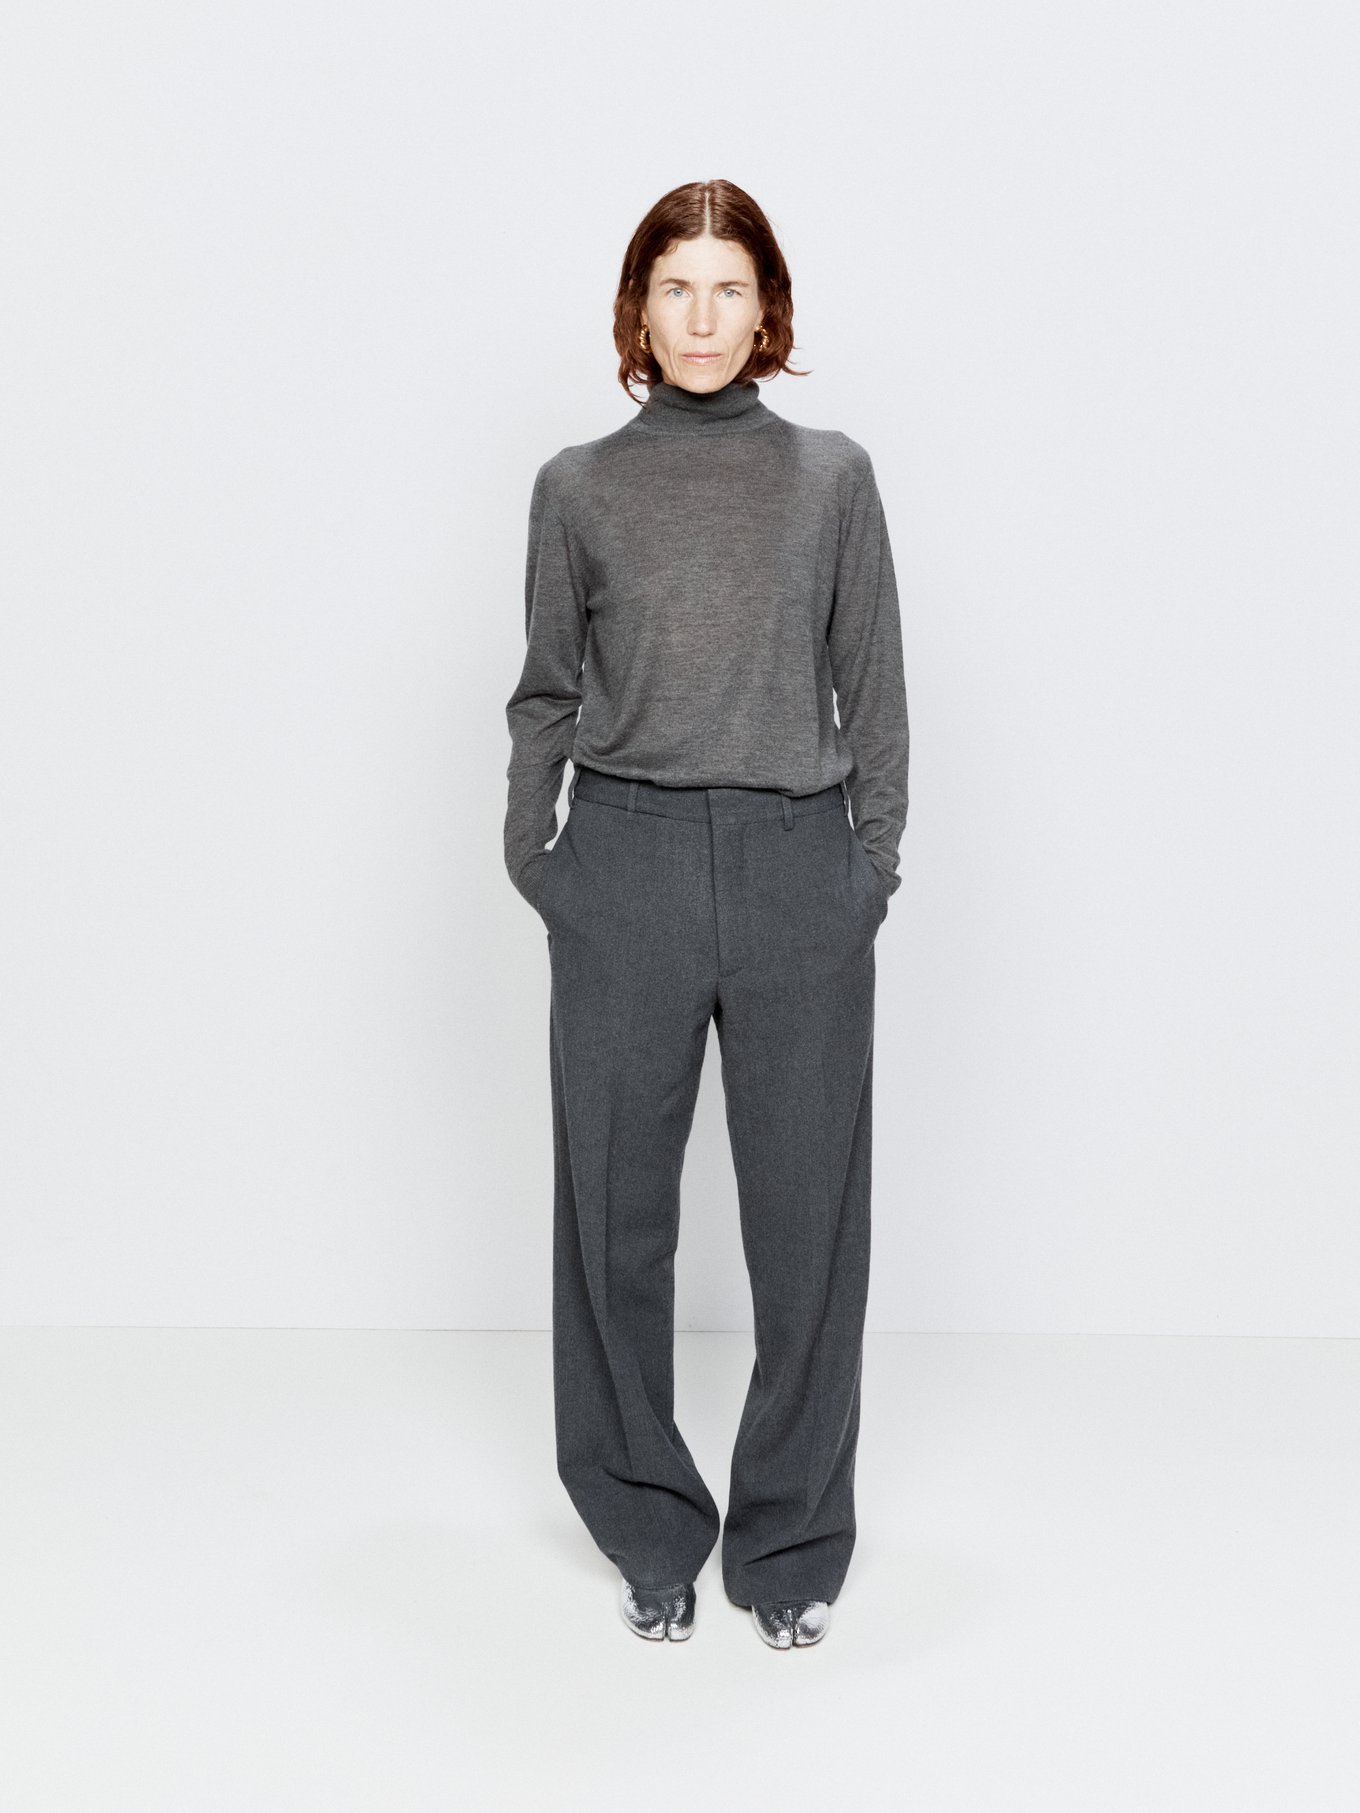 Grey Roll-neck fine-knit | sweater MATCHES Raey cashmere | US